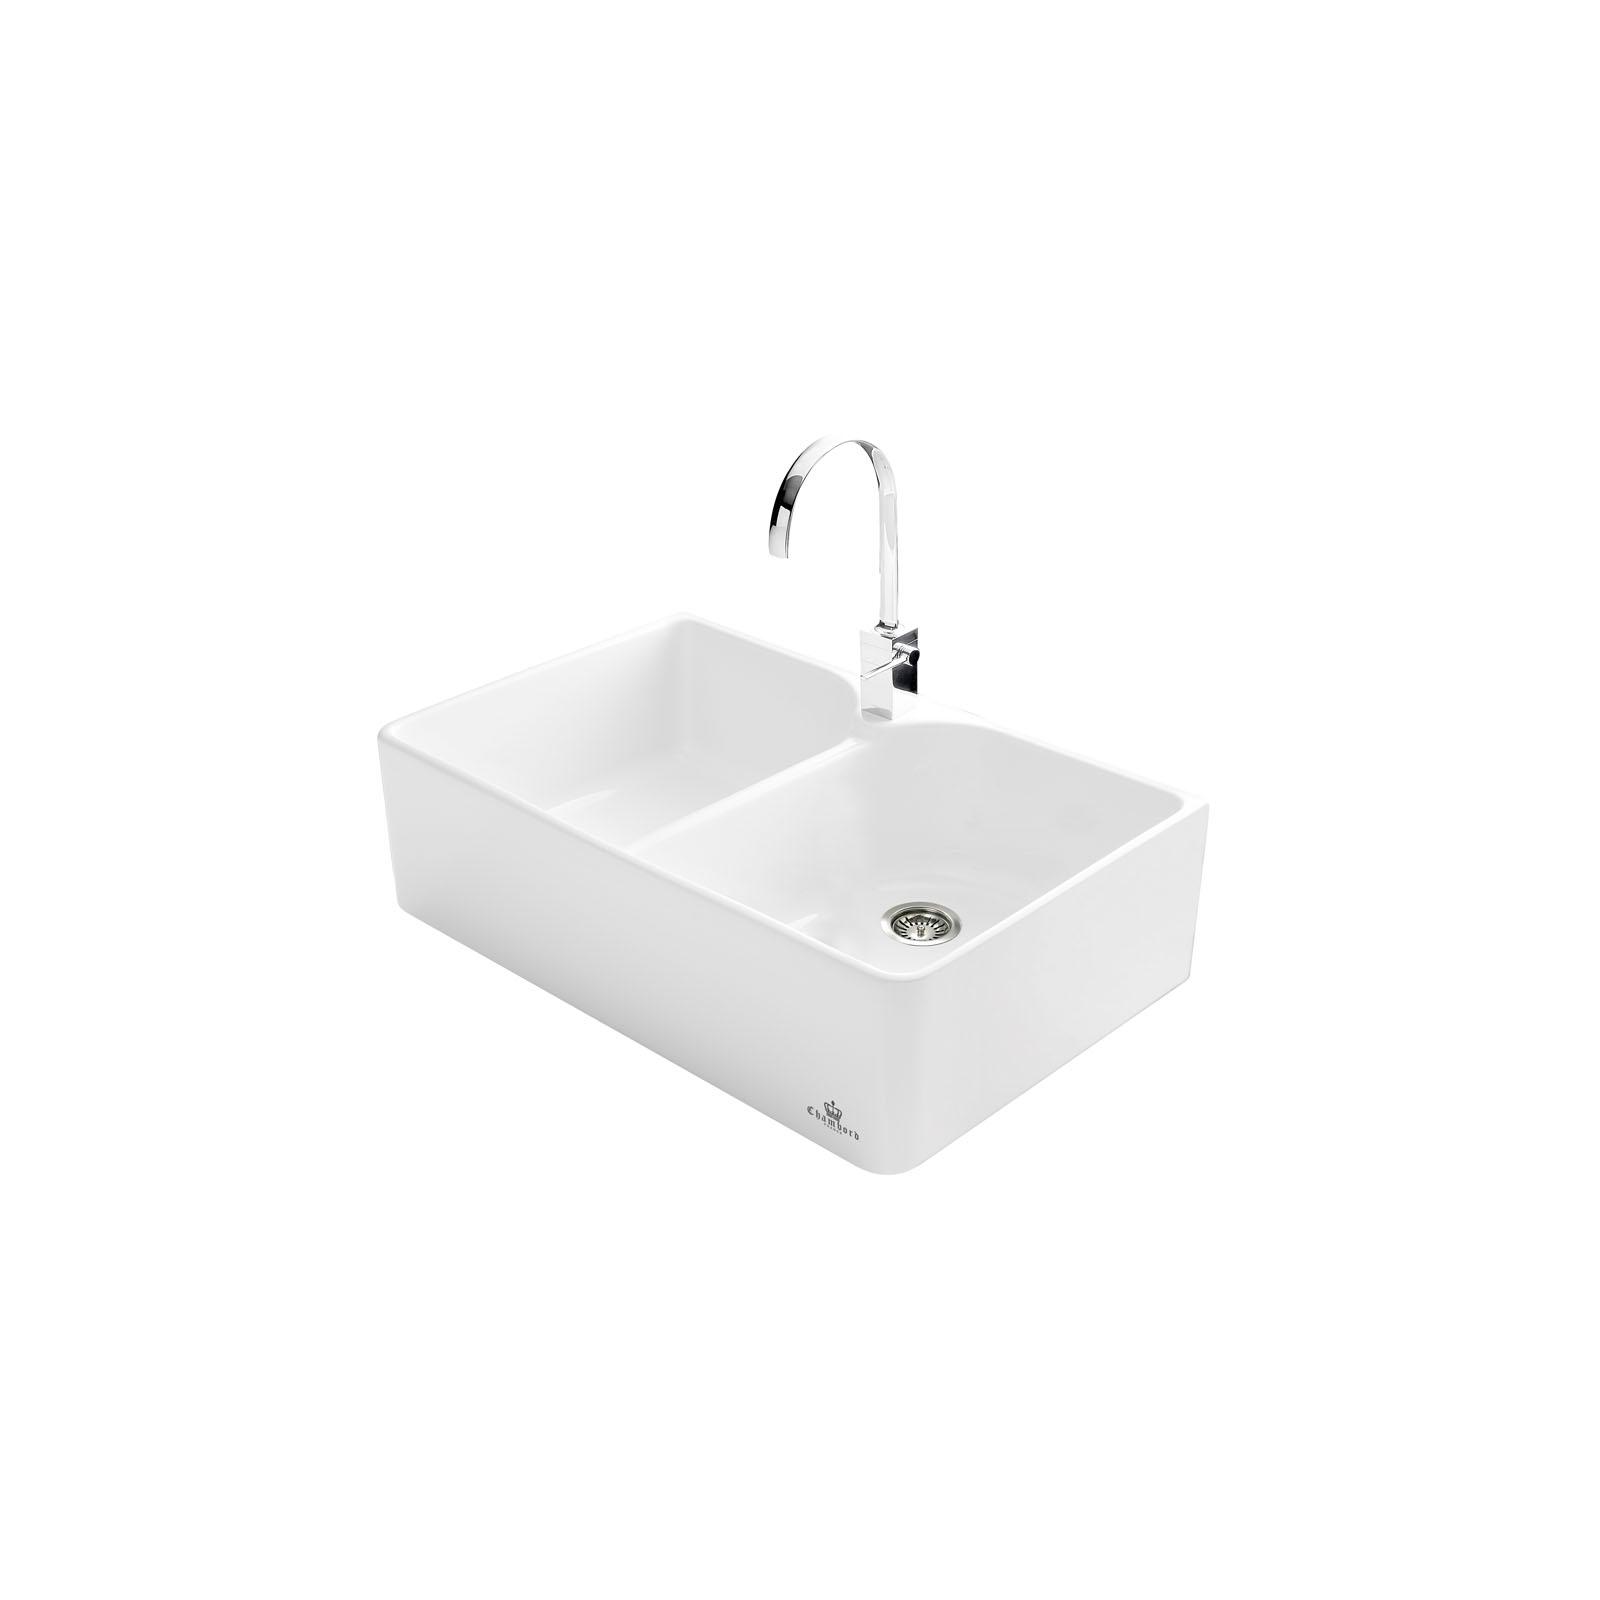 High-quality sink Clotaire II - two bowls, ceramic - ambience 2